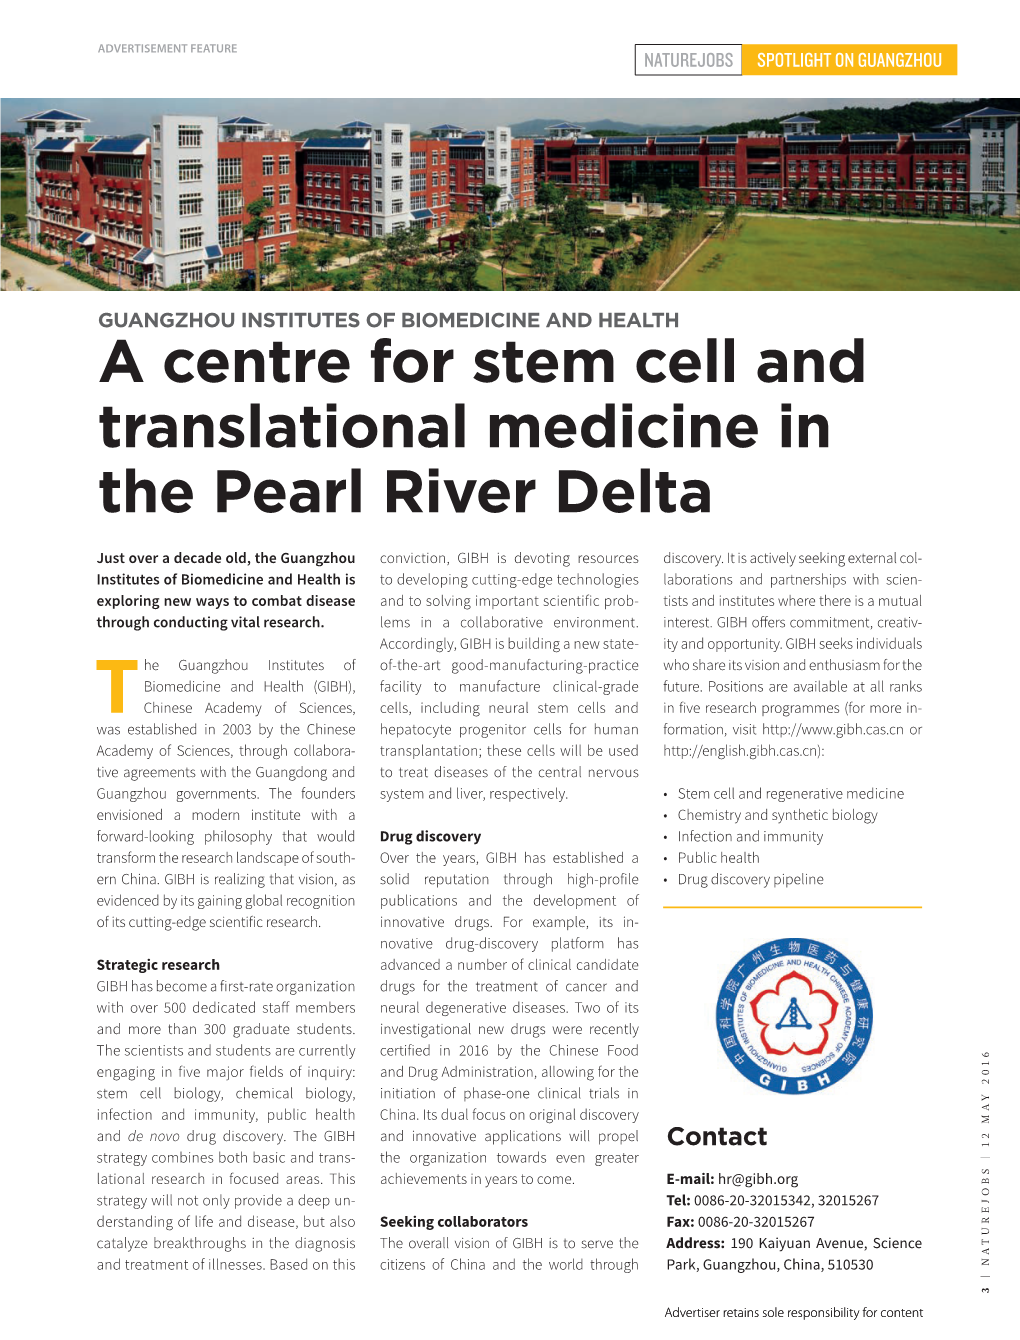 A Centre for Stem Cell and Translational Medicine in the Pearl River Delta